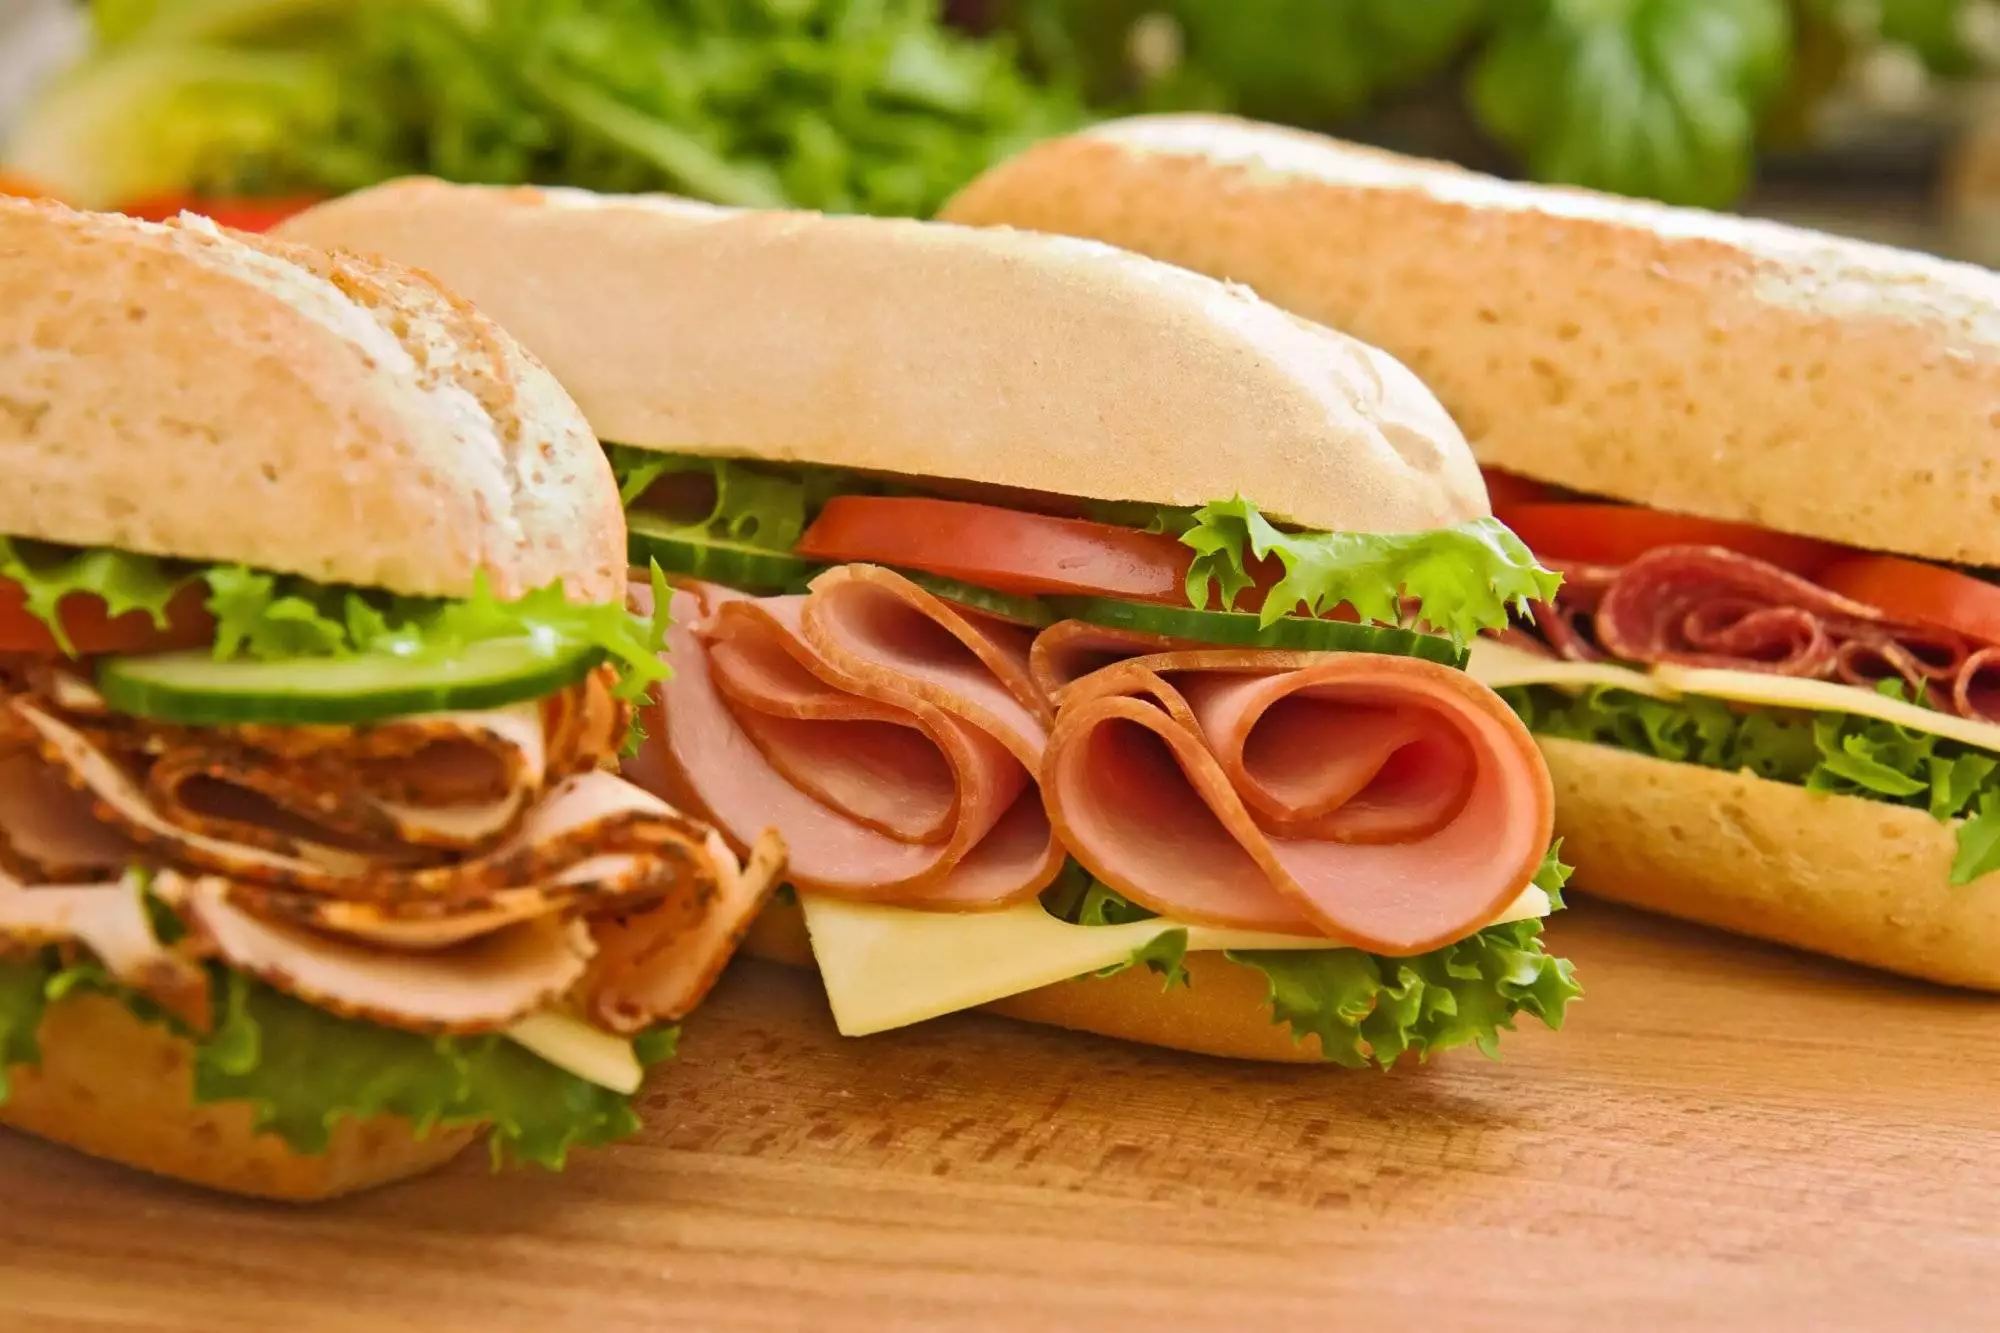 Flavorful Flower Mound Sub Sandwiches Await at Jersey Mike’s Subs